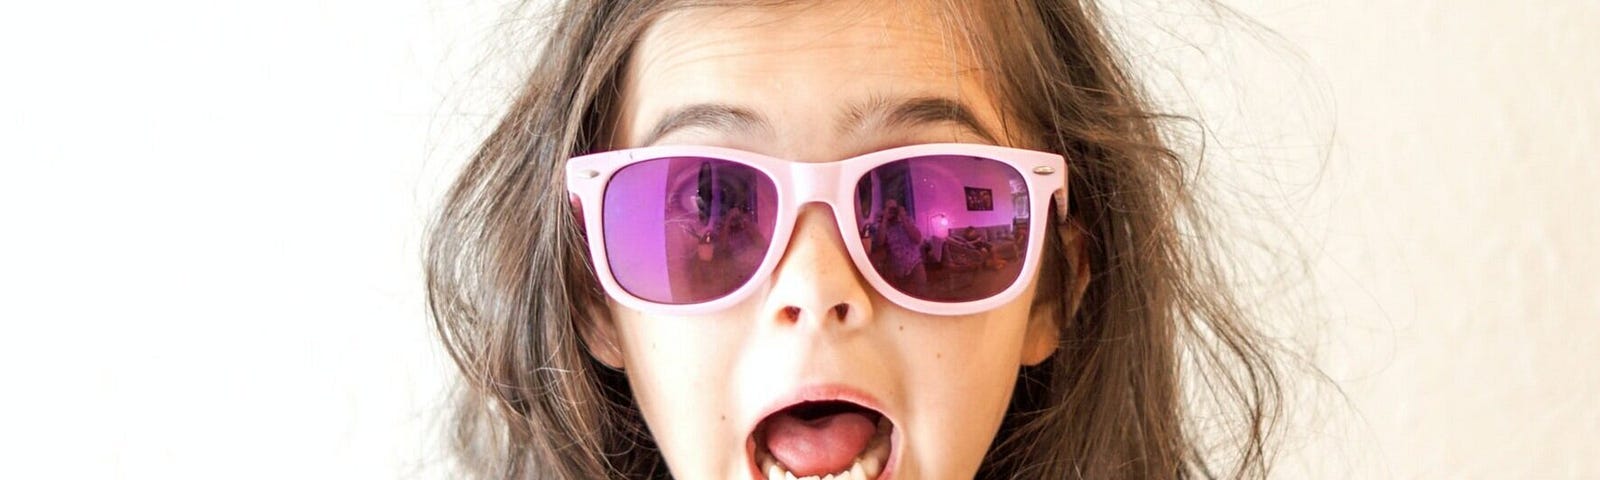 A young girl, with messy brown hair wearing reflective sunglasses, her eyebrows raised and mouth open in surprise or perhaps shock.